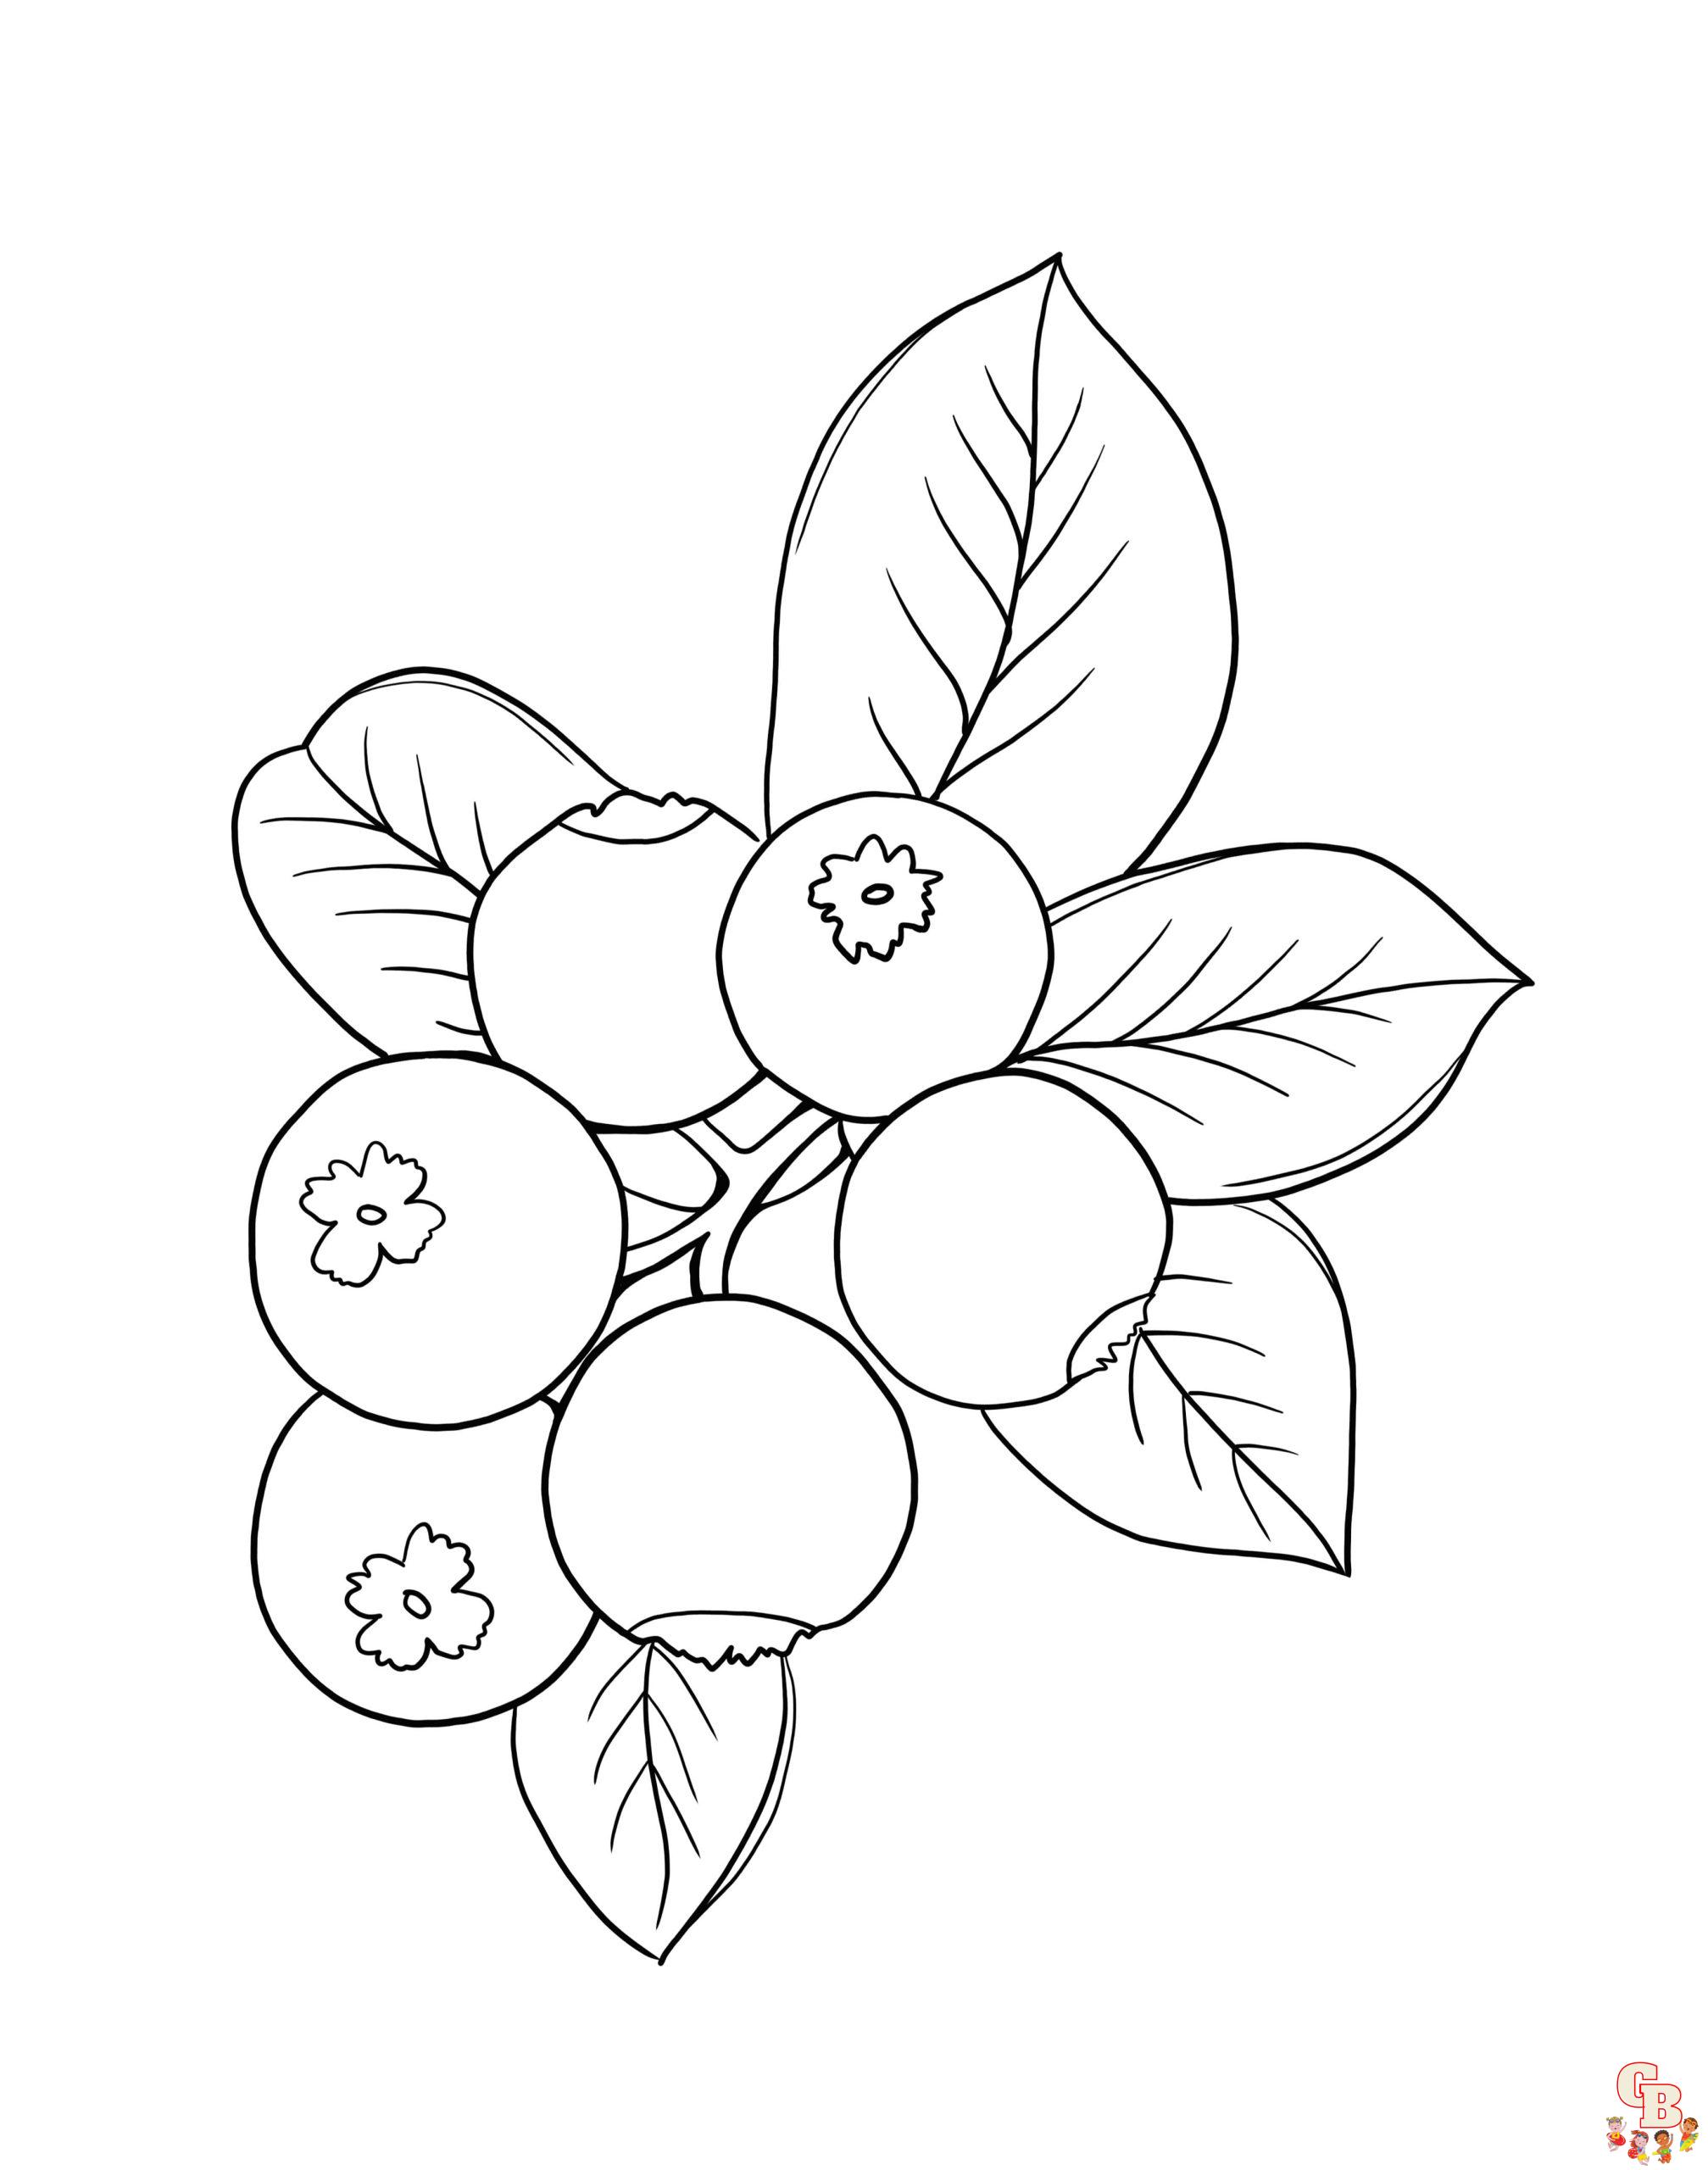 Blueberry coloring pages to print